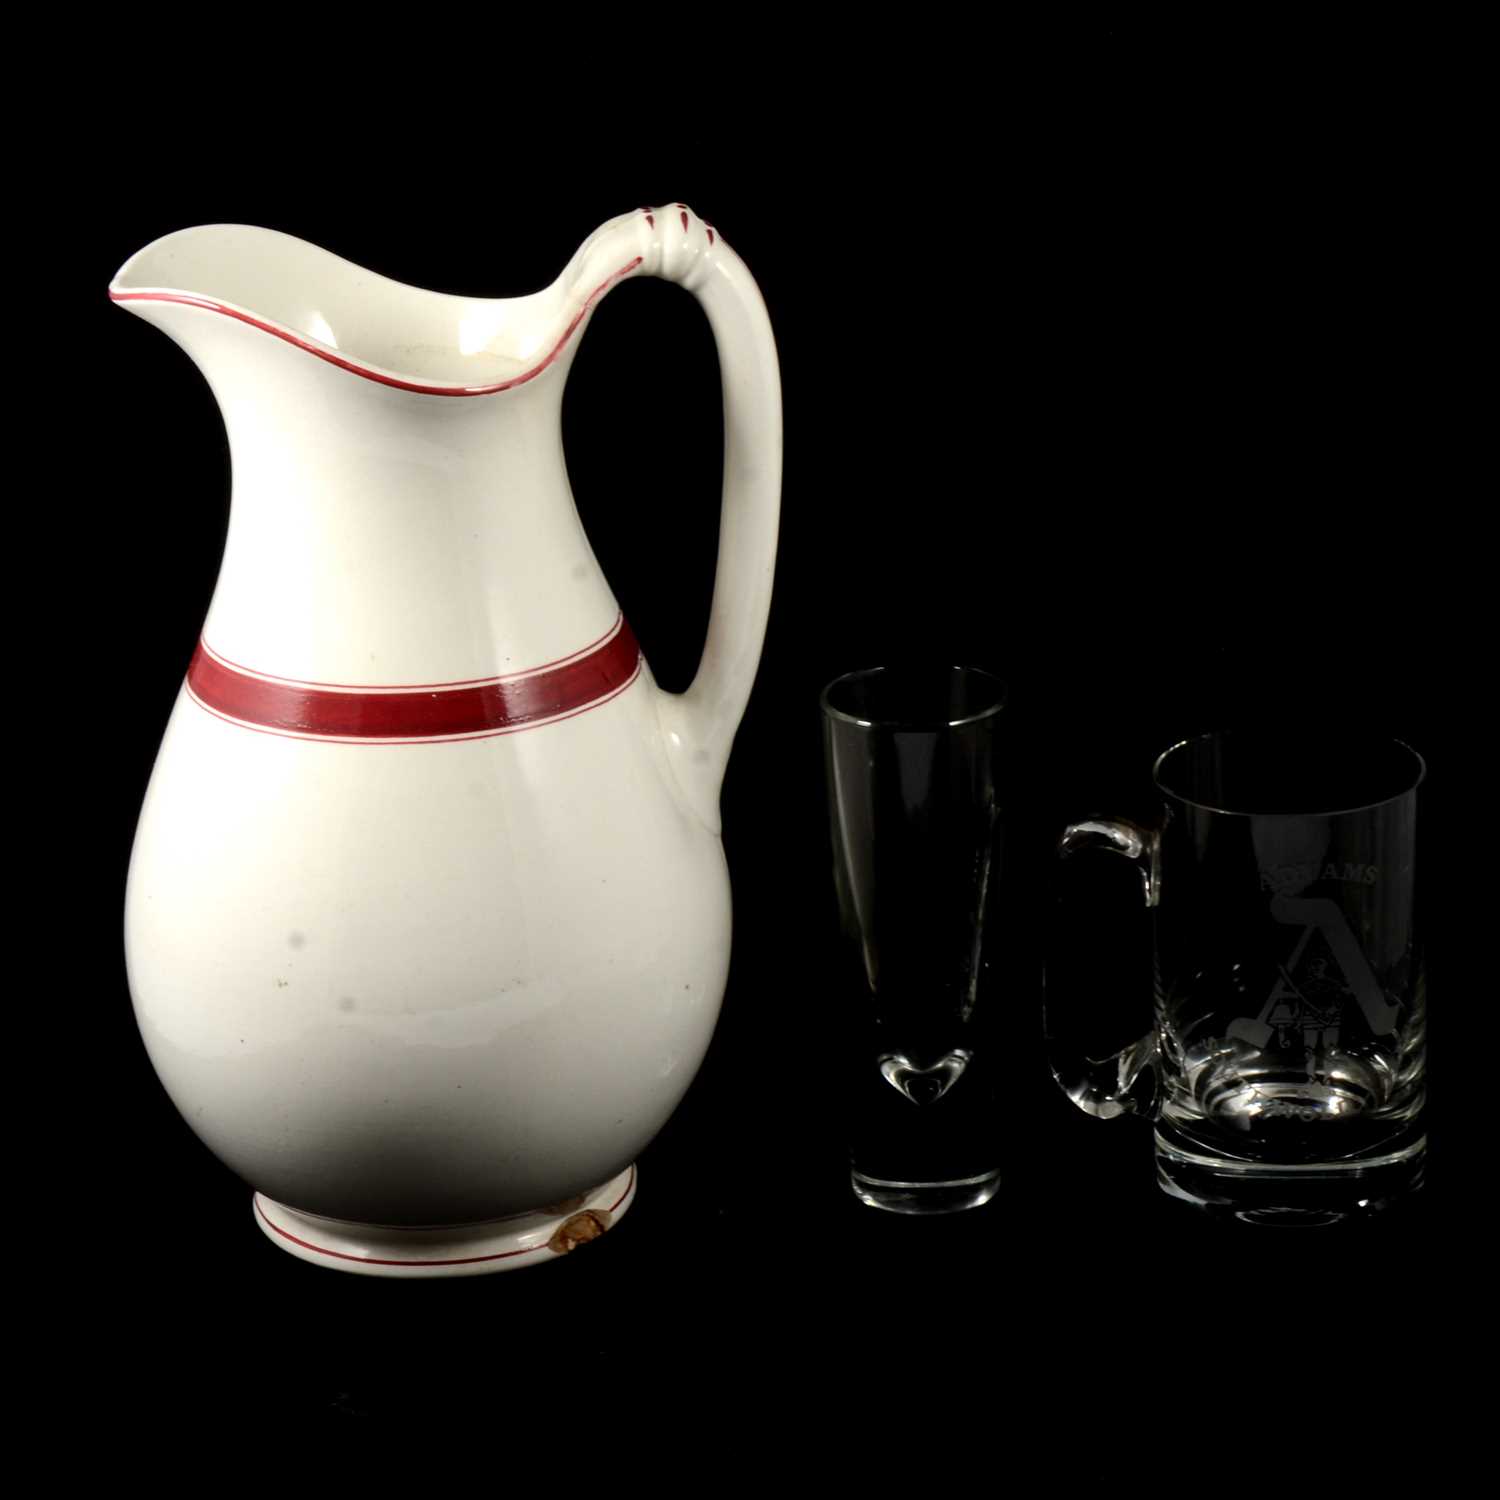 Lot 50 - Decorative and household glass and ceramics